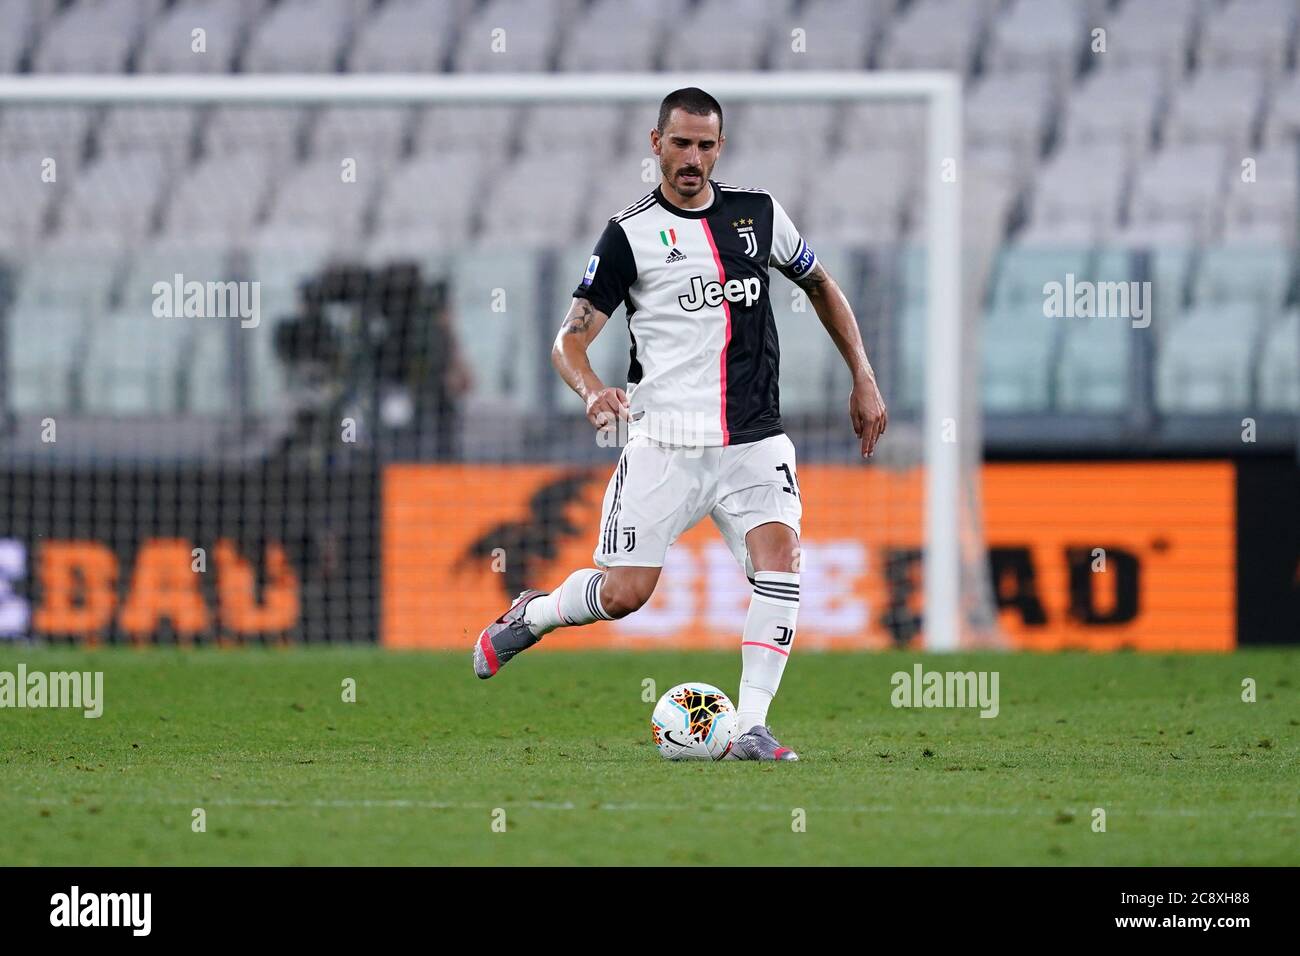 Florence, Italy. 21st May, 2022. Leonardo Bonucci of Juventus FC and  Krzysztof Piatek of ACF Fiorentina compete for the ball during the Serie A  2021/2022 football match between ACF Fiorentina and Juventus